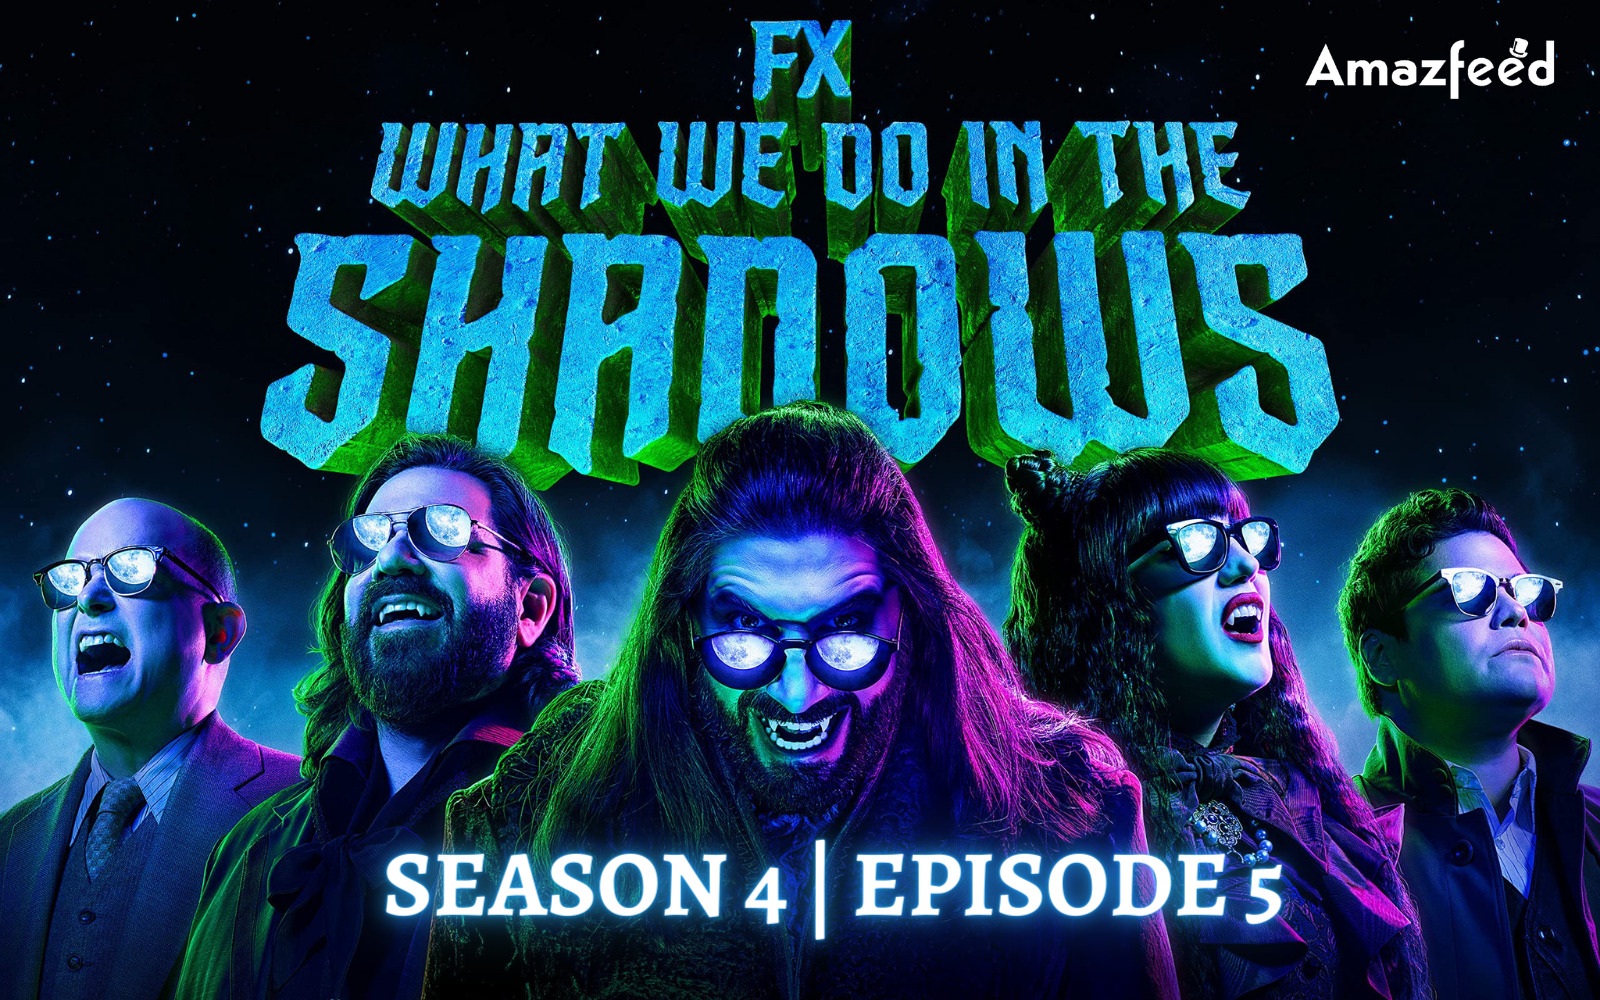 What We Do in the Shadows Season 4 Episode 5 Release date